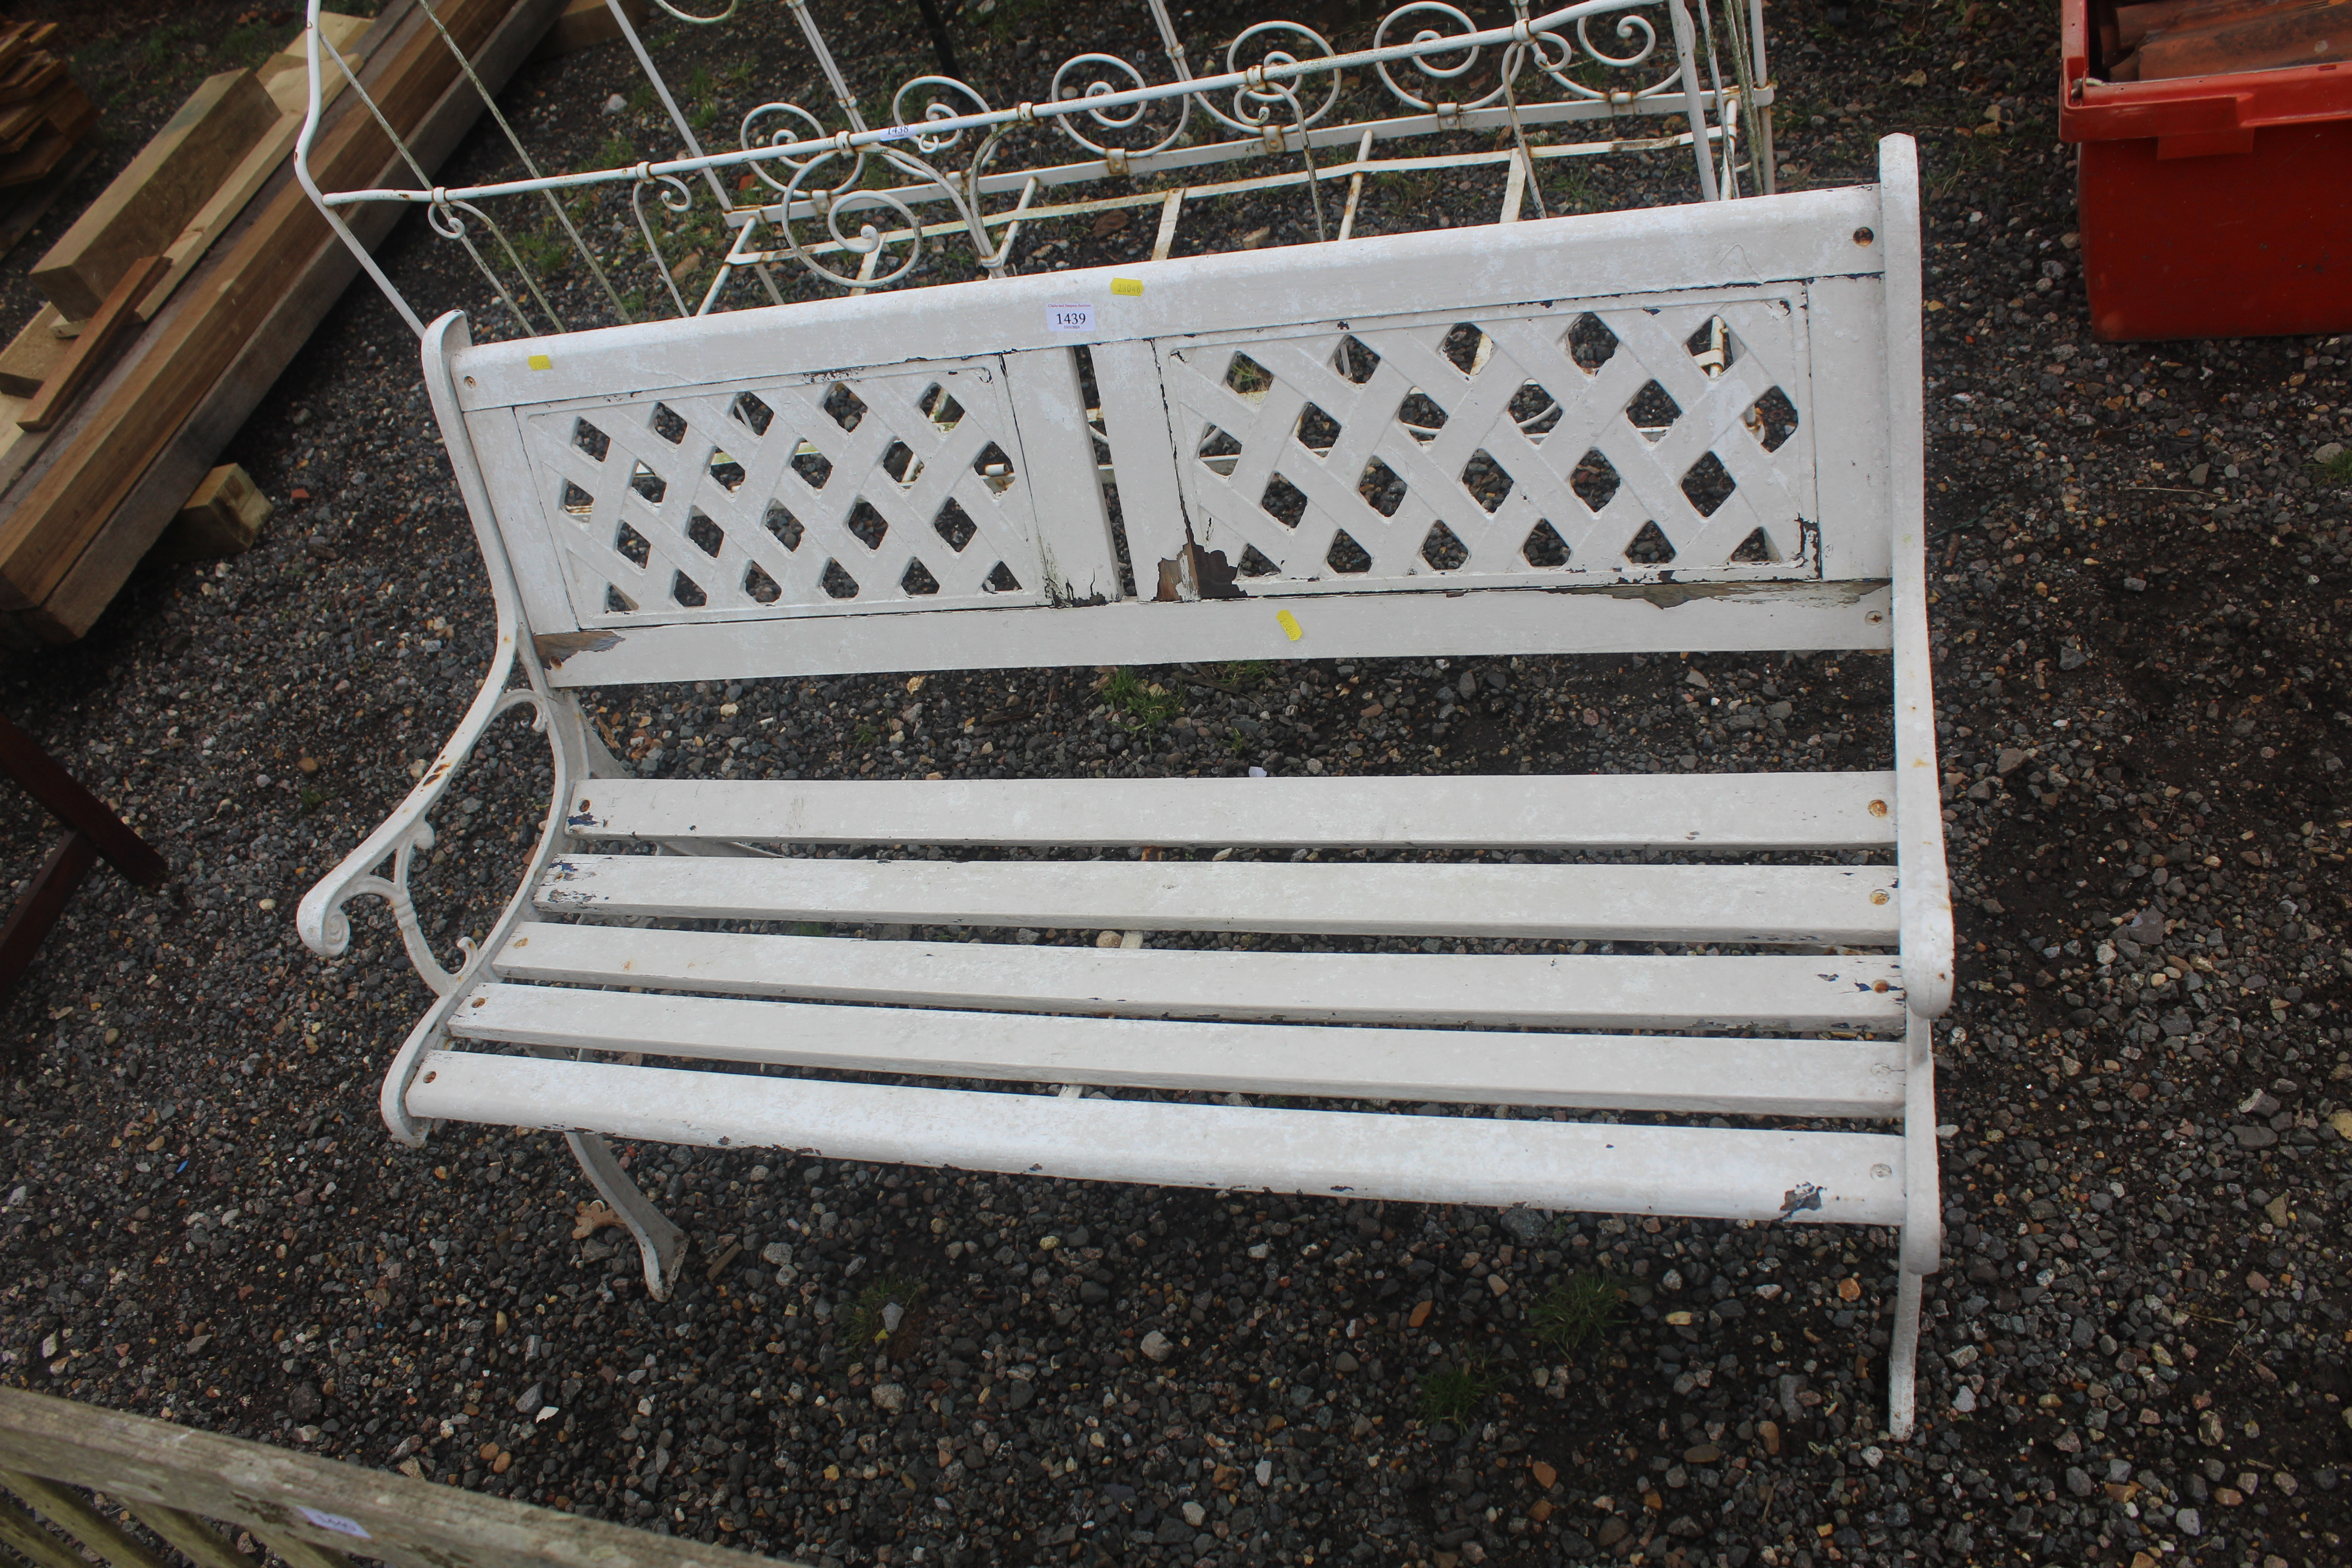 A white painted wooden slated garden bench with ca